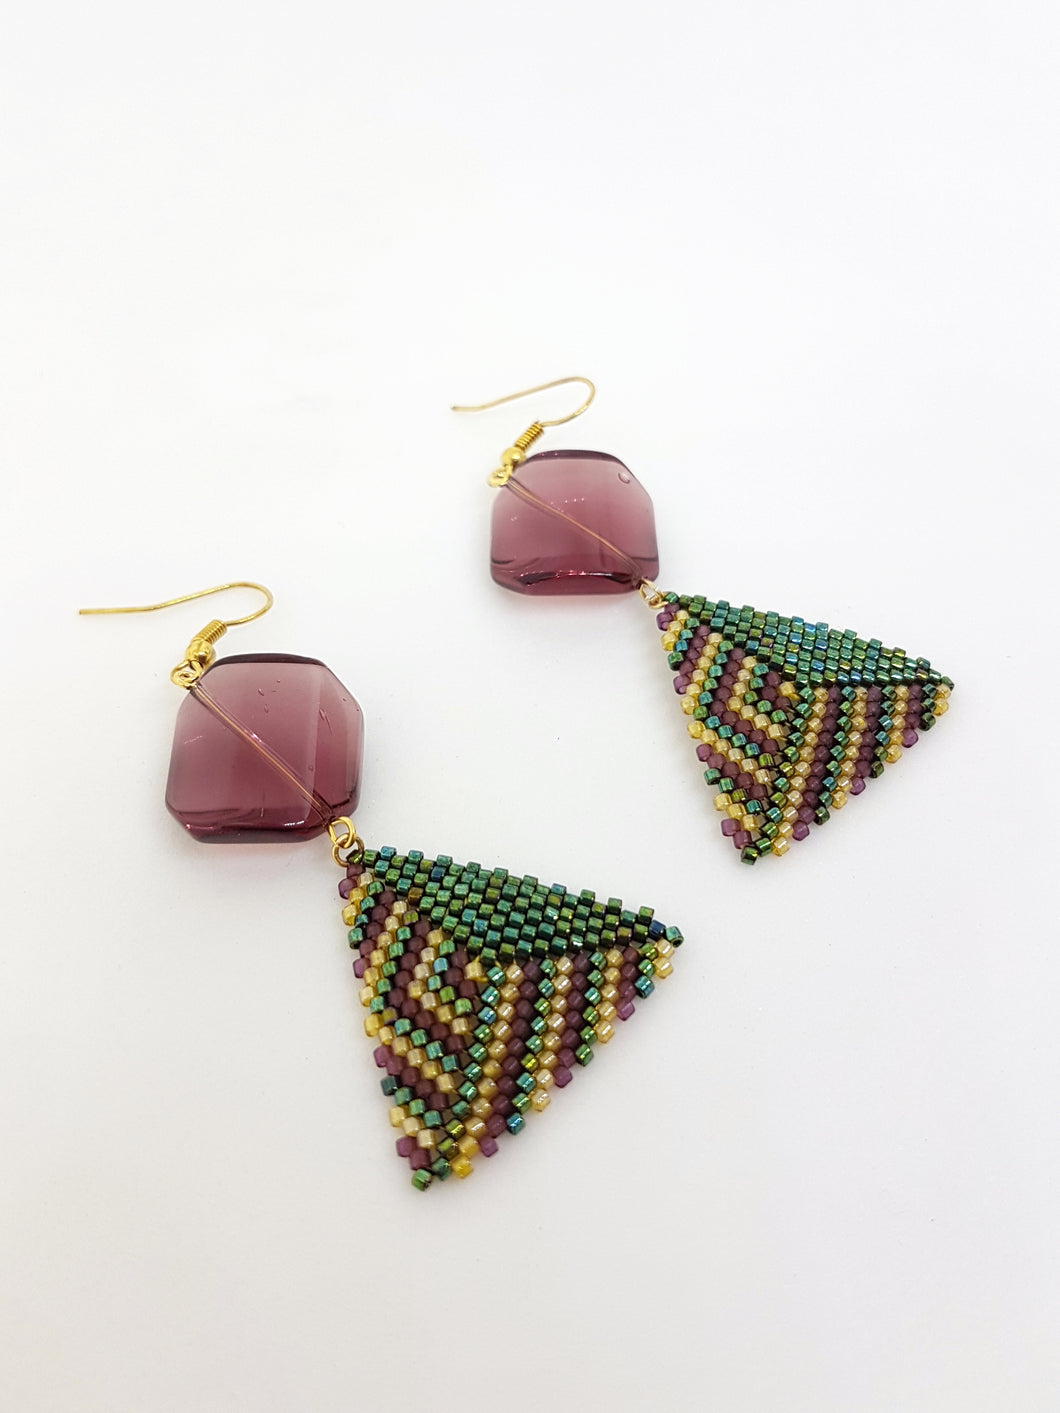 Triangle Earrings in Mauve, Green and Gold